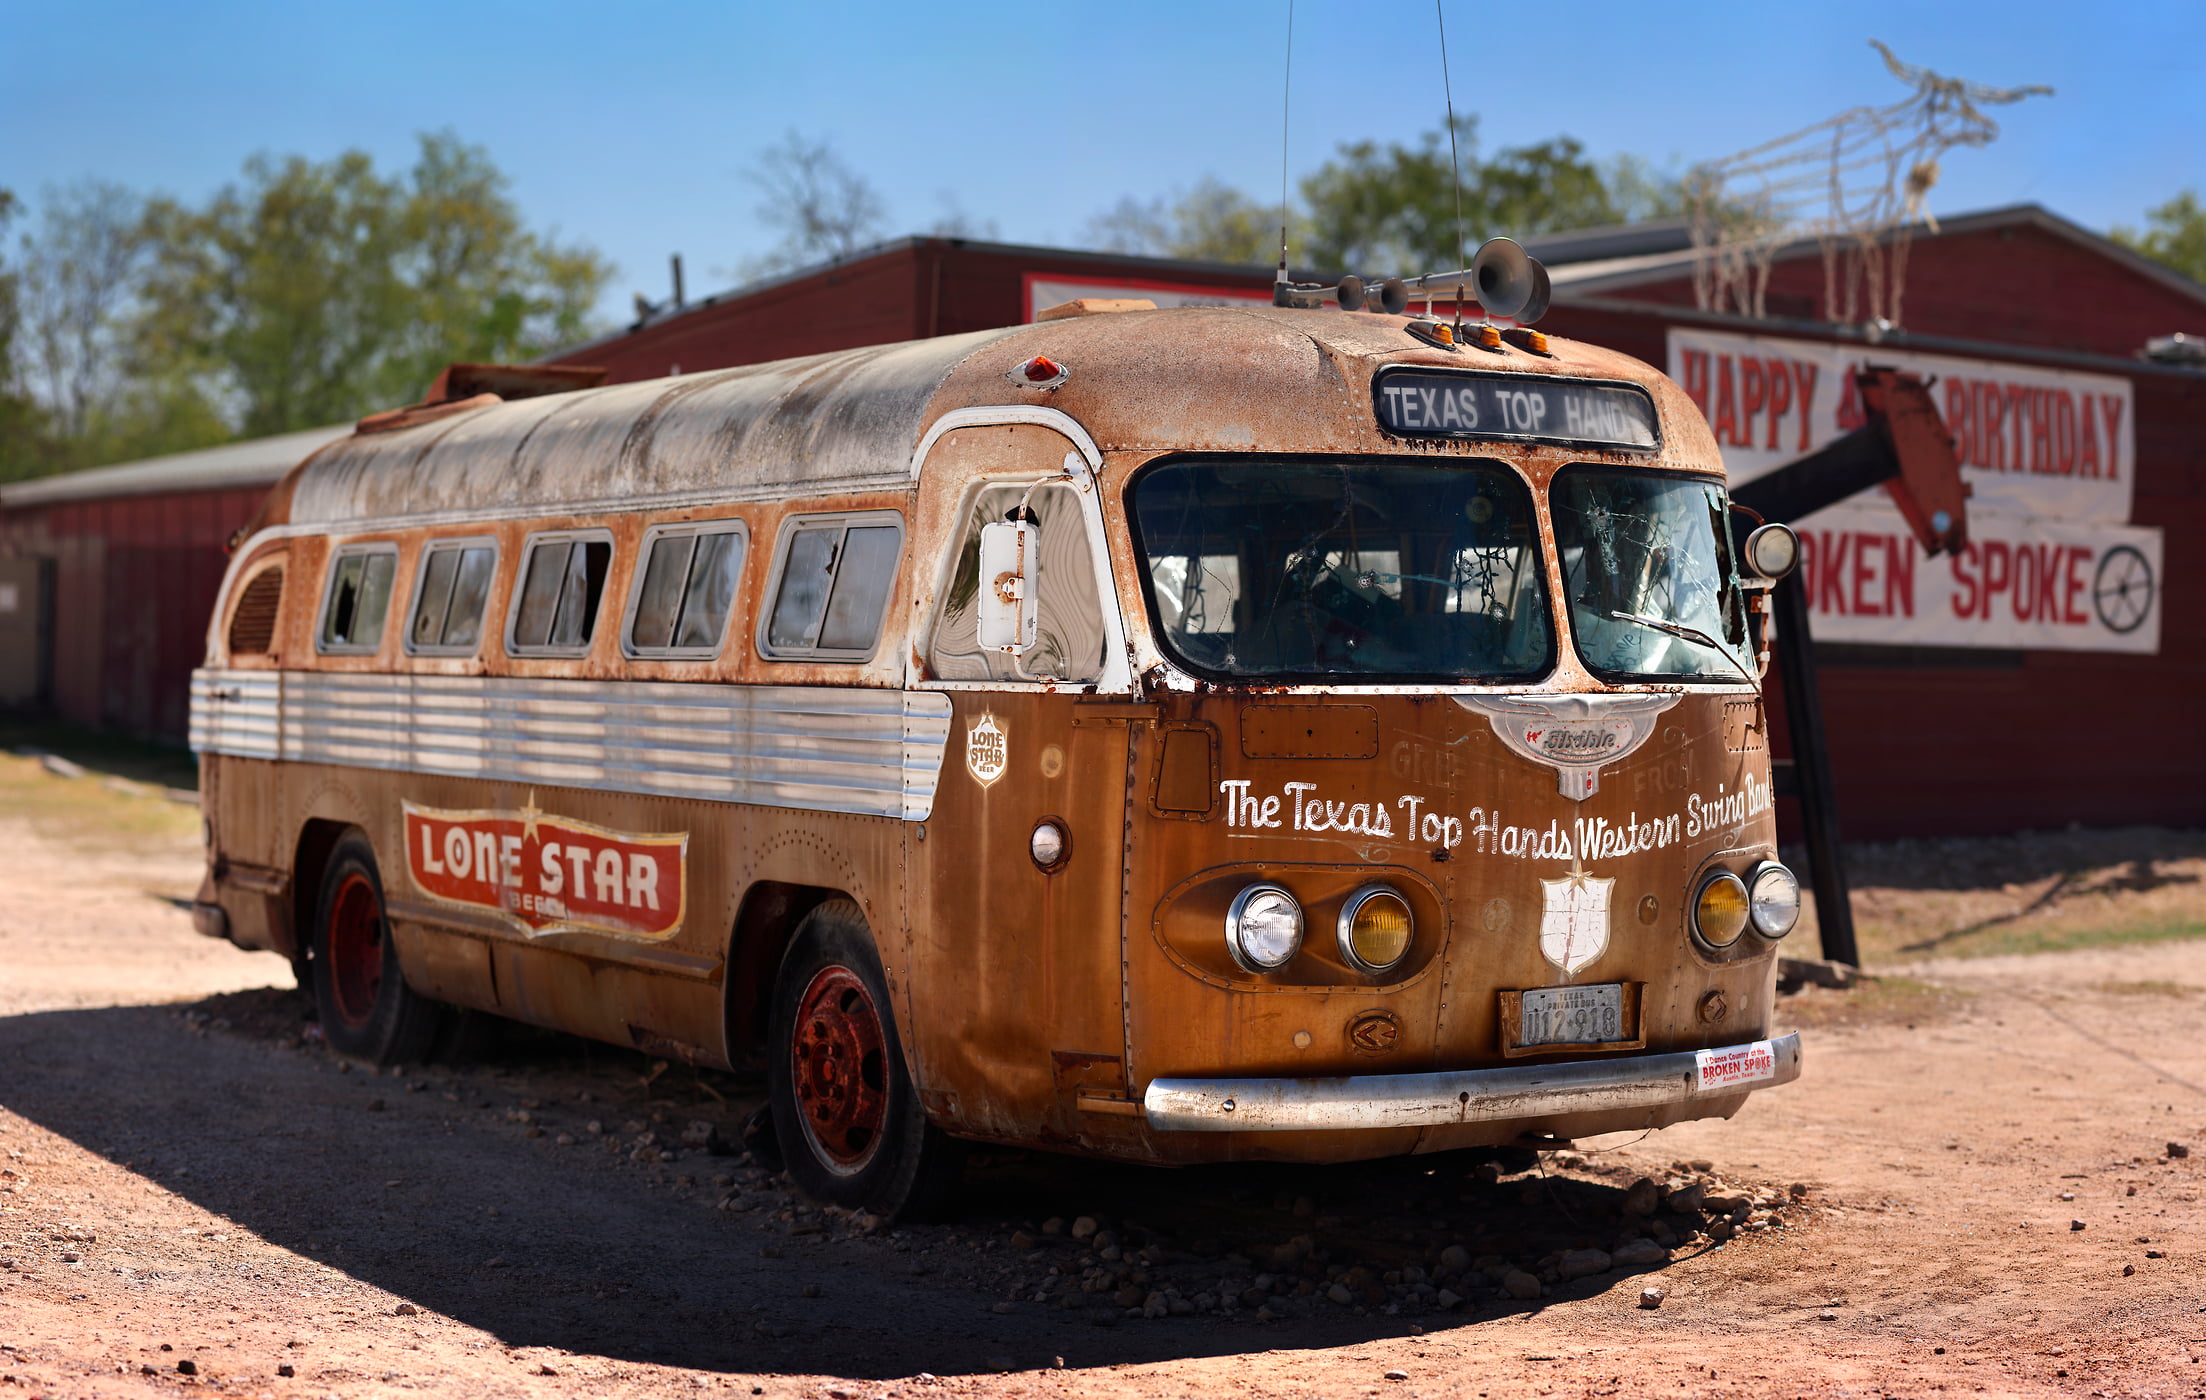 506 megapixels! A very high resolution fine art photograph of an old iconic bus that is emblamatic of Texas culture; VAST photo created by Phil Crawshay in Texas.